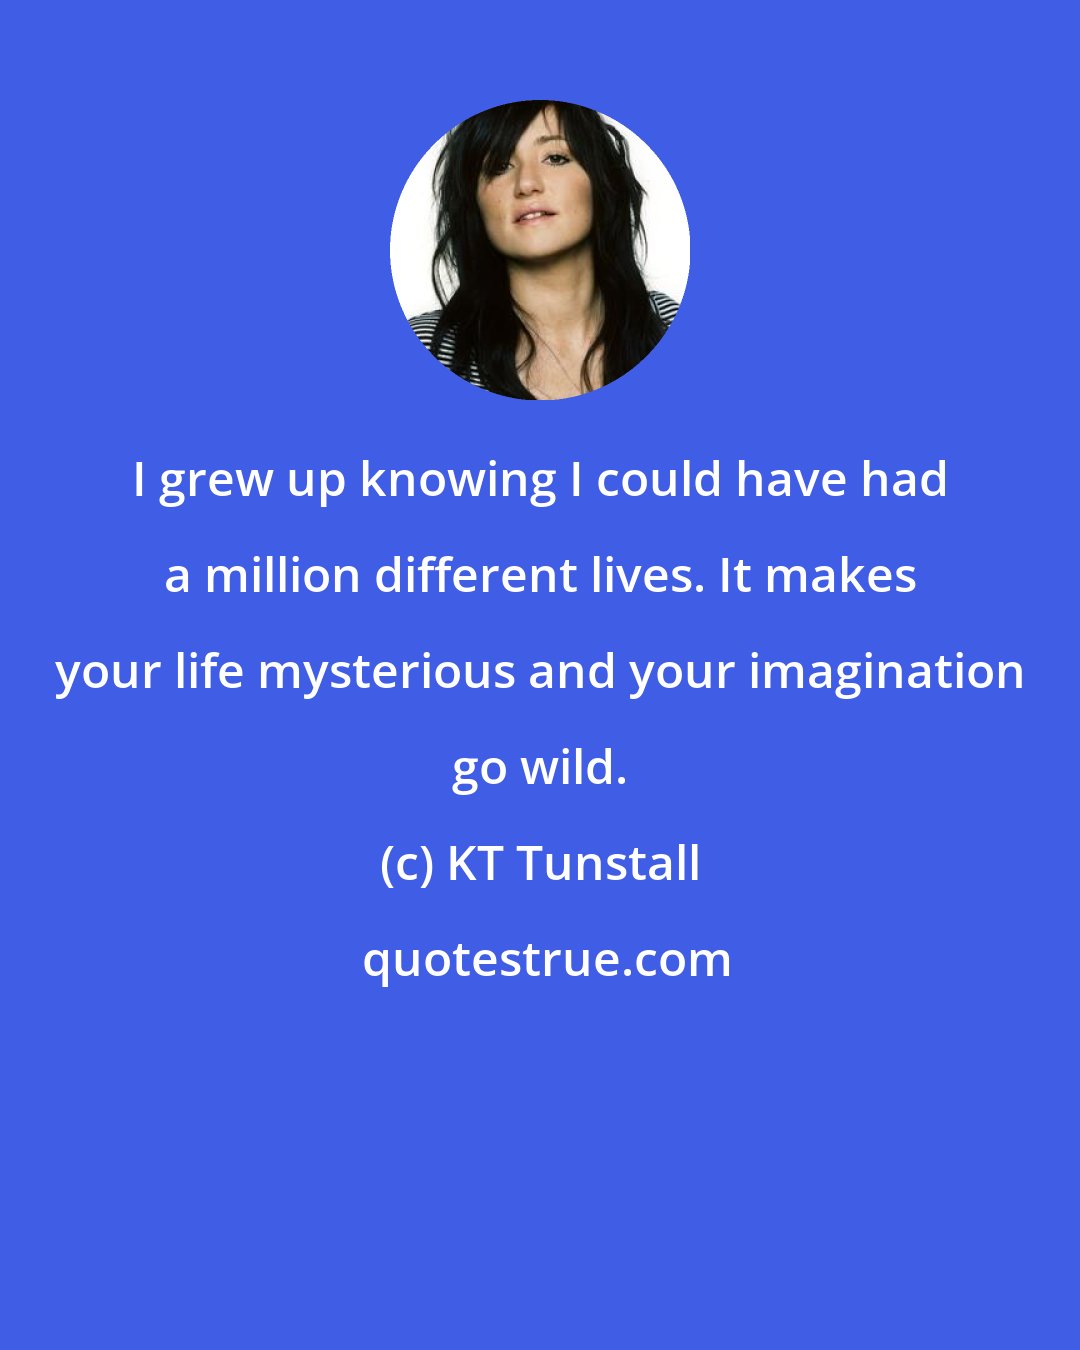 KT Tunstall: I grew up knowing I could have had a million different lives. It makes your life mysterious and your imagination go wild.